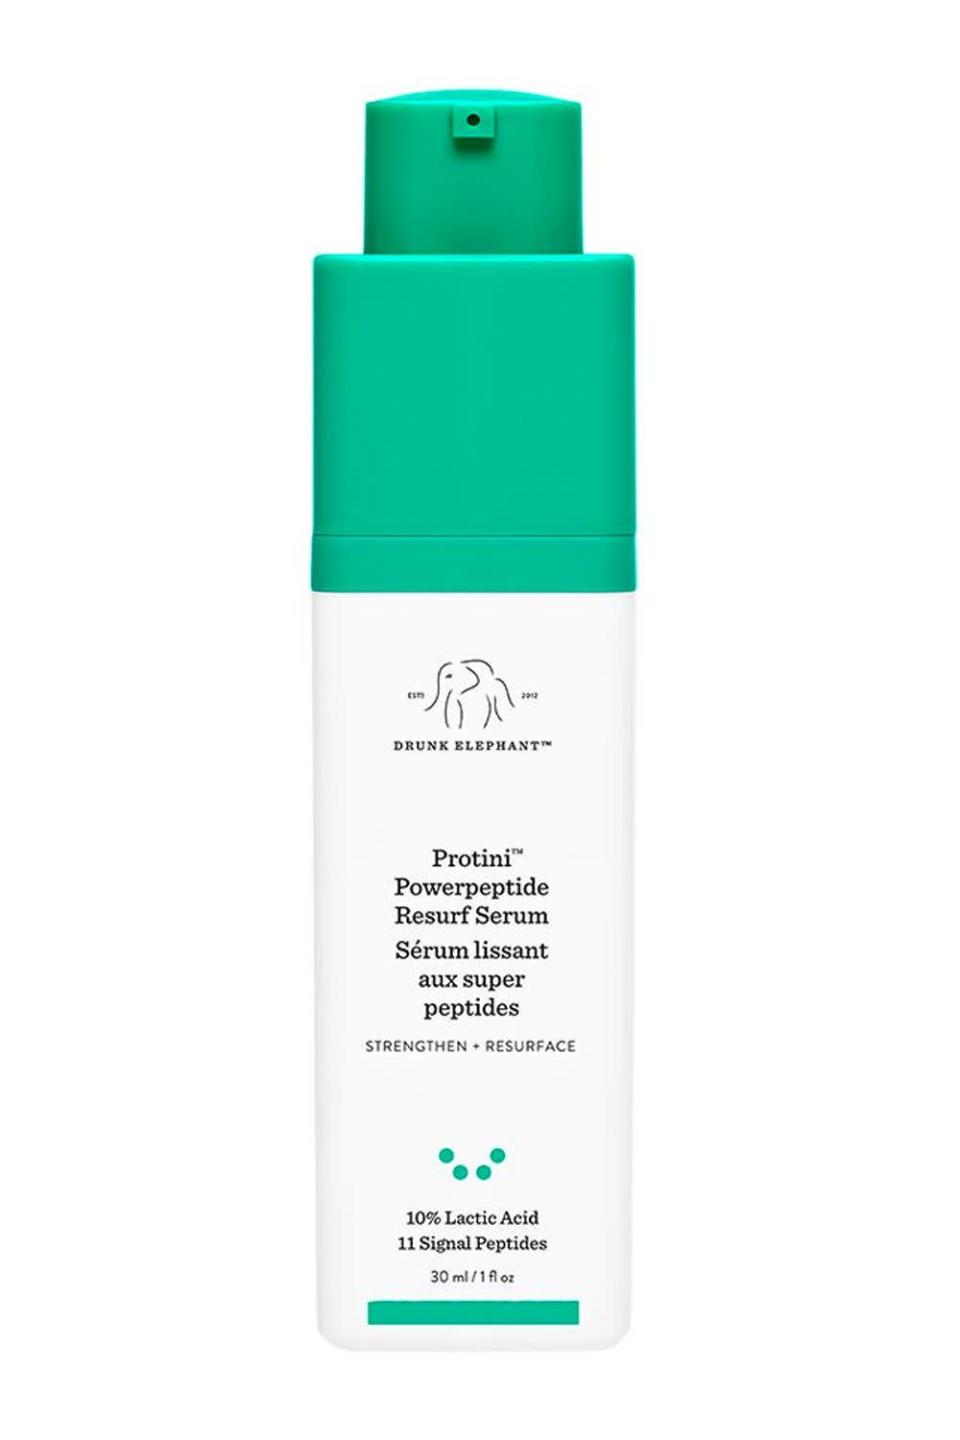 <p><strong>Drunk Elephant</strong></p><p>sephora.com</p><p><strong>$82.00</strong></p><p><a href="https://go.redirectingat.com?id=74968X1596630&url=https%3A%2F%2Fwww.sephora.com%2Fproduct%2Fdrunk-elephant-protini-trade-powerpeptide-resurfacing-serum-P470024&sref=https%3A%2F%2Fwww.cosmopolitan.com%2Fstyle-beauty%2Fbeauty%2Fg40604552%2Fbest-anti-aging-serums%2F" rel="nofollow noopener" target="_blank" data-ylk="slk:Shop Now" class="link ">Shop Now</a></p><p>A must-try for anyone who craves plump, bouncy skin, this serum from <a href="https://www.cosmopolitan.com/style-beauty/beauty/a36166600/clean-beauty-guide/" rel="nofollow noopener" target="_blank" data-ylk="slk:clean beauty brand" class="link ">clean beauty brand</a> Drunk Elephant<strong> checks all the right boxes when it comes to a good anti-aging product</strong>. It works on a cellular level to stimulate collagen and elastin production to improve skin's firmness (ty, peptides), plus it contains 10 percent lactic acid to clear away dead skin cells on the surface of the skin for a smooth, even-toned glow.</p><p><em><strong>THE REVIEW: </strong>"This is the only anti-aging product that works for my skin. I had severe redness and dryness and this product along with the Drunk Elephant luxury oil are heaven sent–my skin is so much smoother and happier."</em></p>